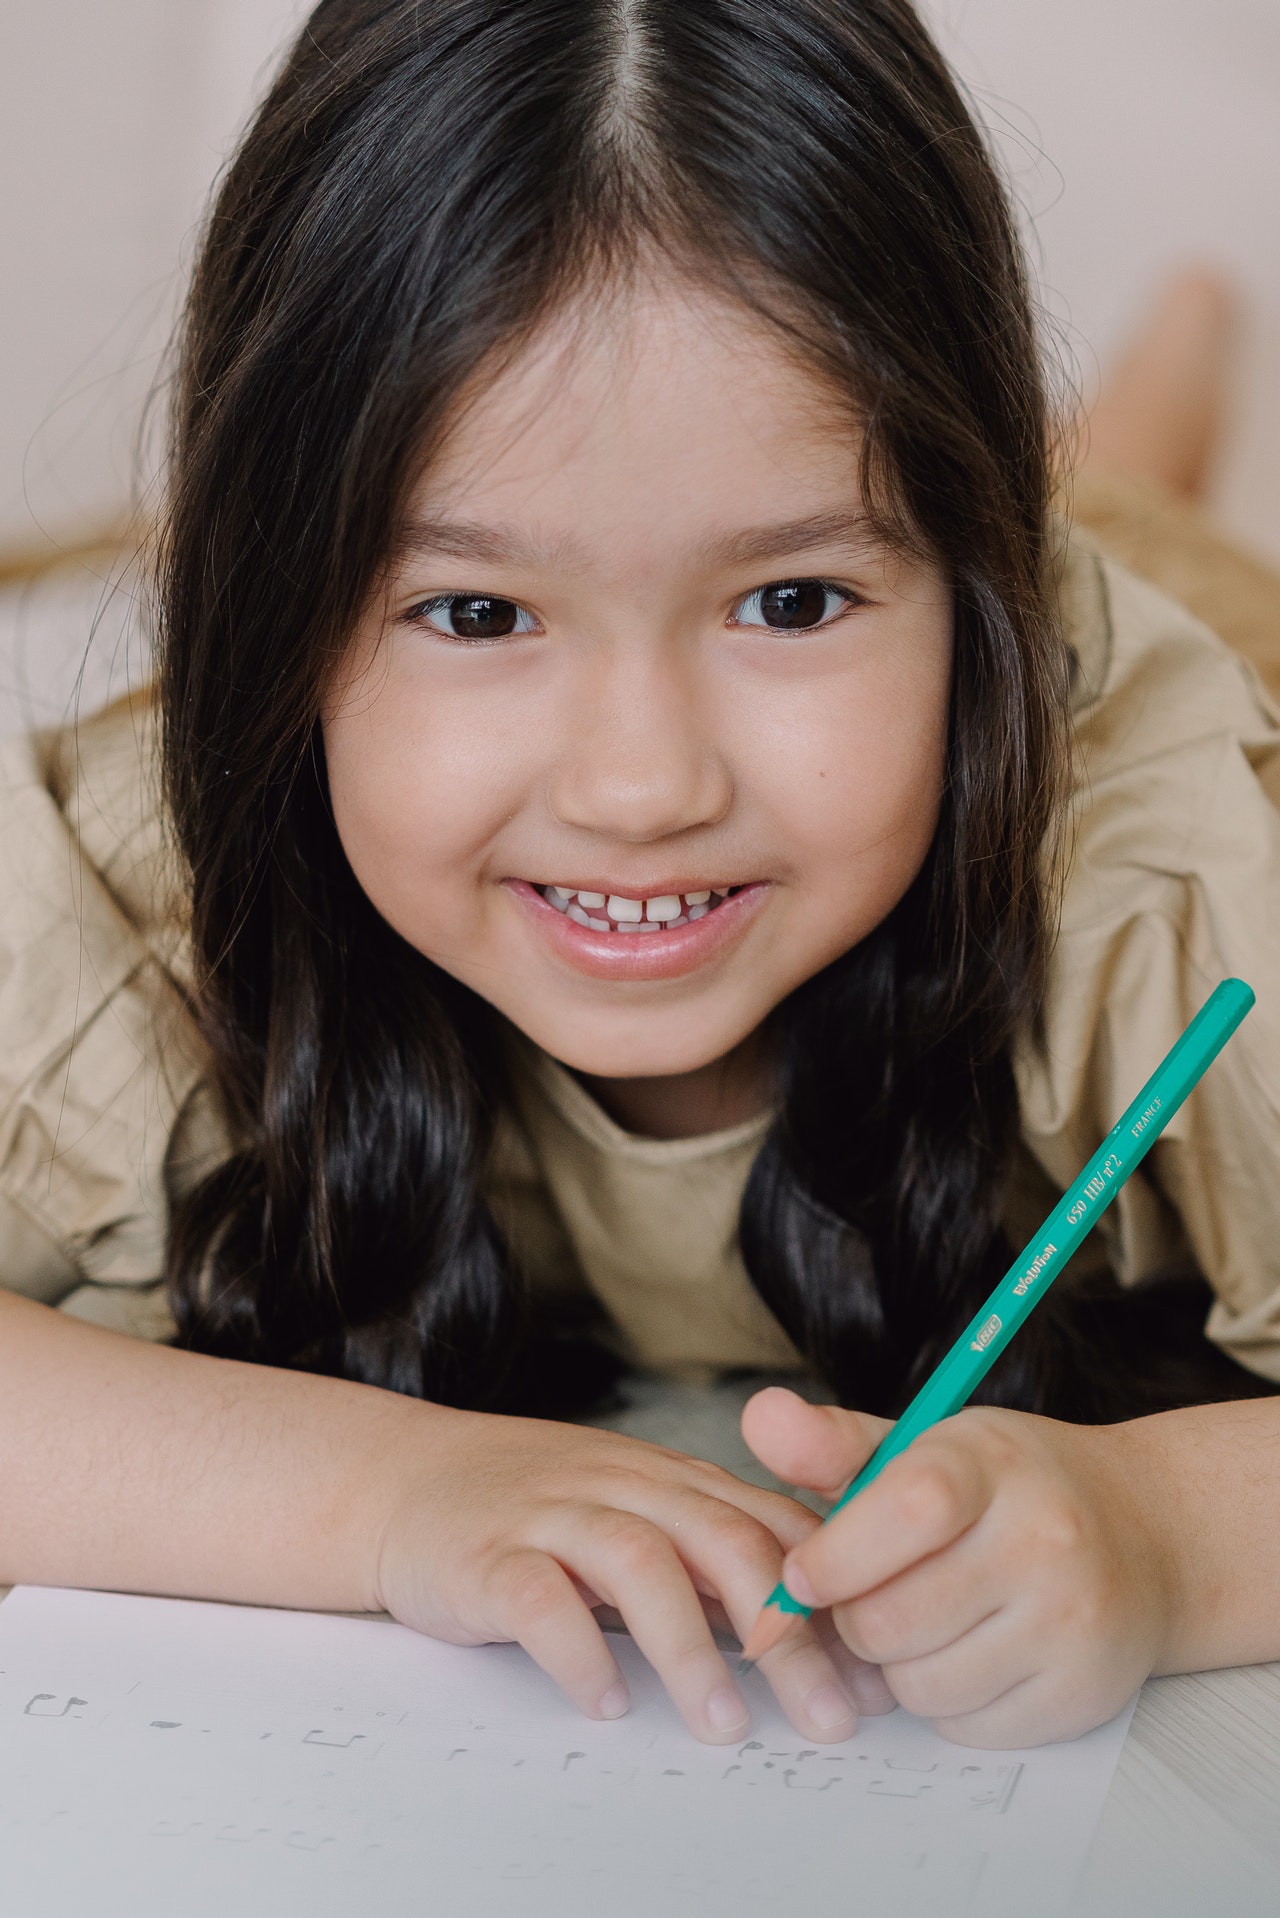 young girl smiling and holding green pen